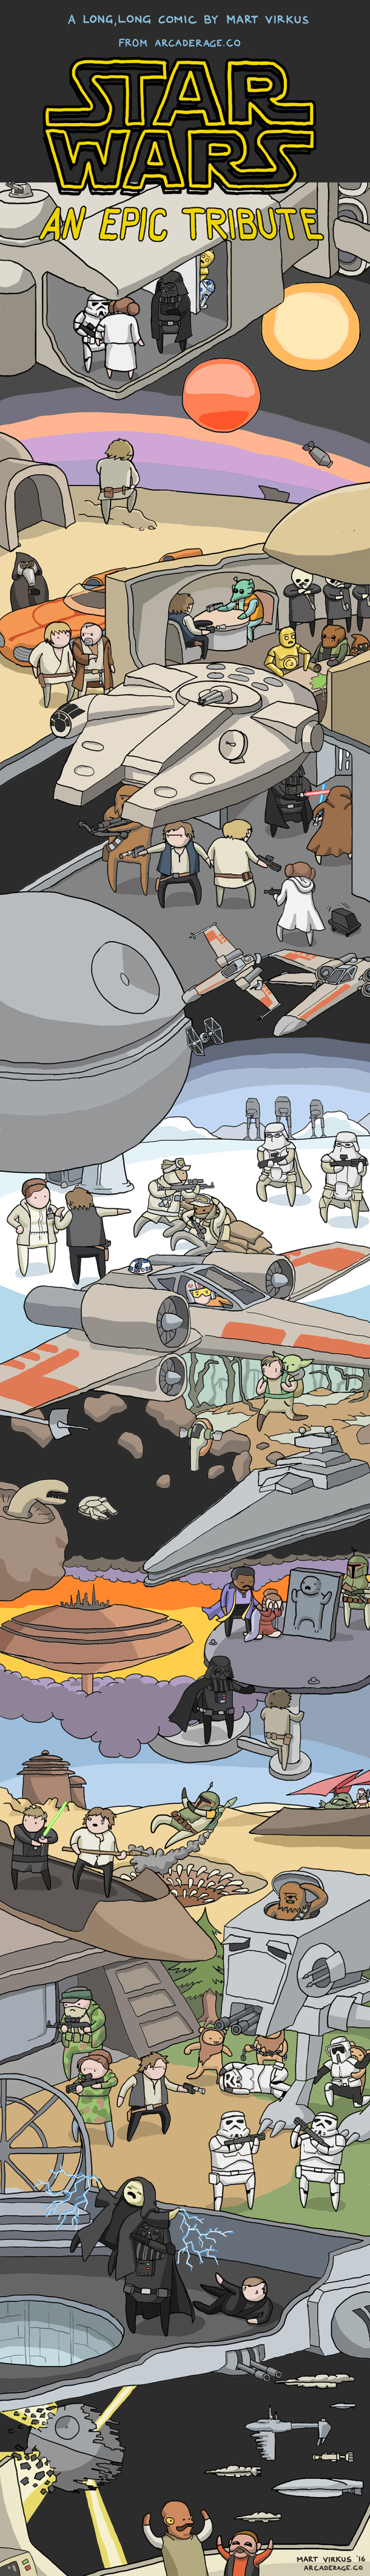 The Entire Star Wars Original Trilogy in One Big Comic